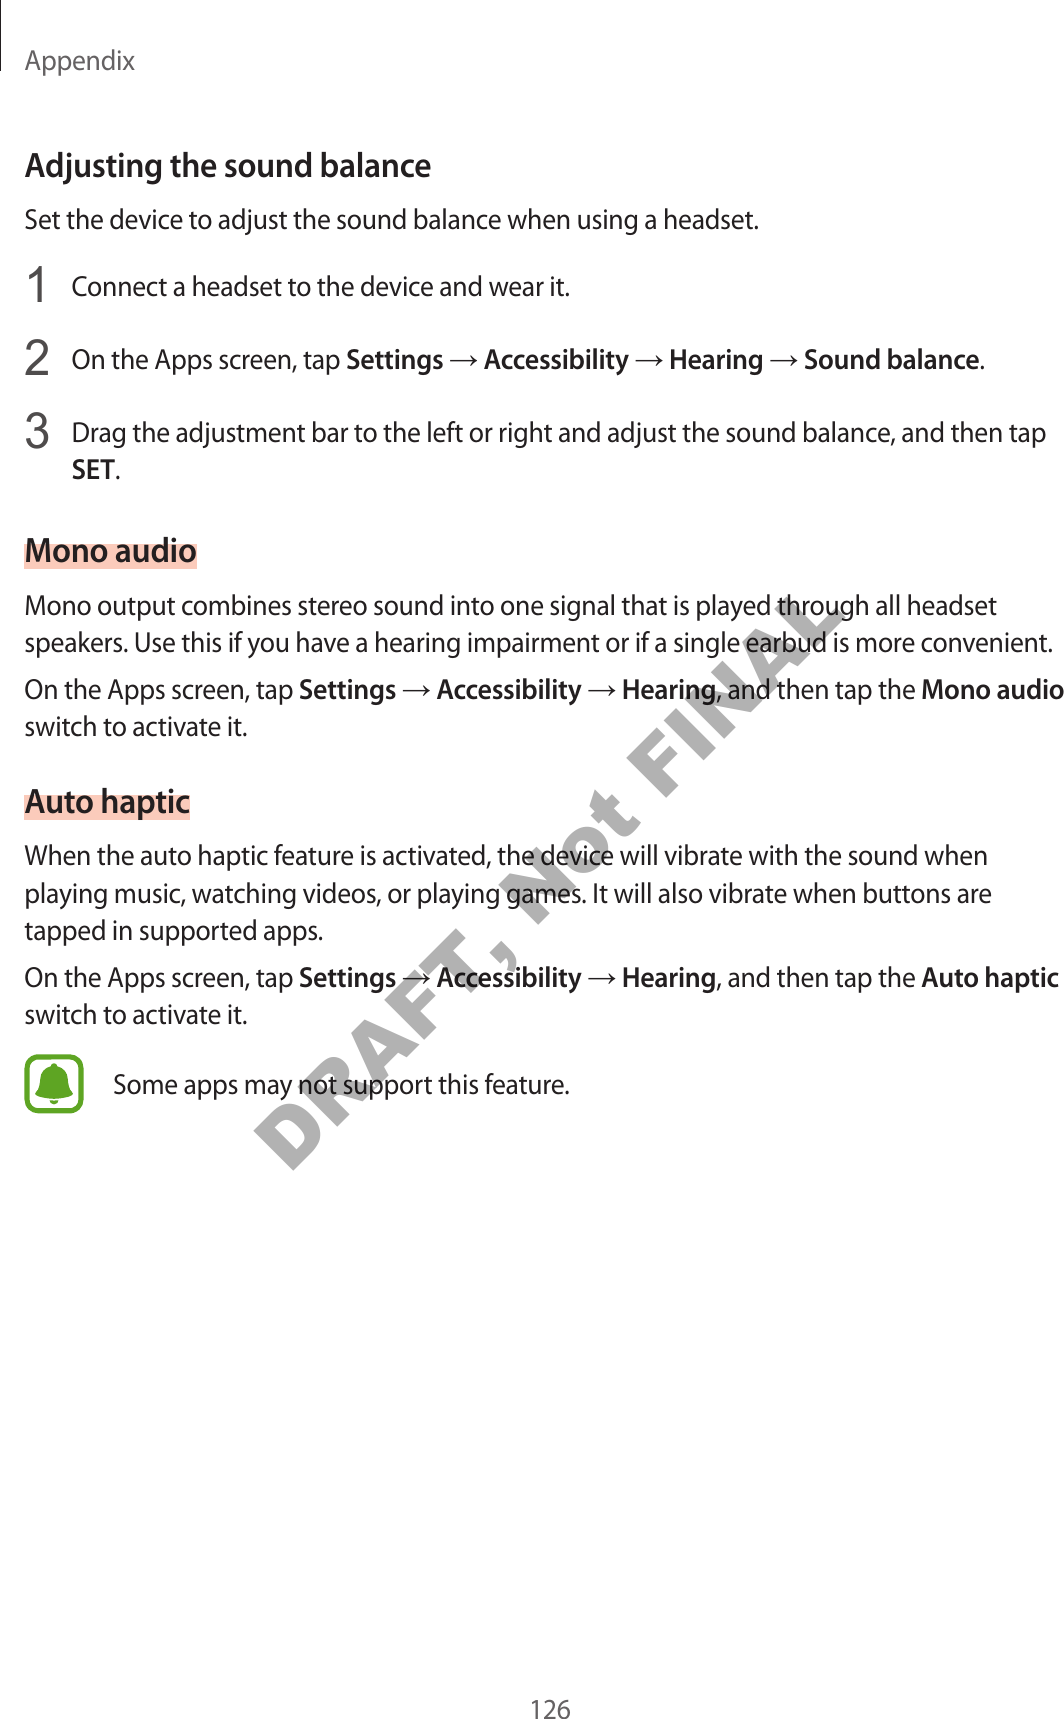 Appendix126Adjusting the sound balanceSet the device to adjust the sound balance when using a headset.1  Connect a headset to the device and wear it.2  On the Apps screen, tap Settings ĺ Accessibility ĺ Hearing ĺ Sound balance.3  Drag the adjustment bar to the left or right and adjust the sound balance, and then tap SET.Mono audioMono output combines stereo sound into one signal that is played through all headset speakers. Use this if you have a hearing impairment or if a single earbud is more convenient.On the Apps screen, tap Settings ĺ Accessibility ĺ Hearing, and then tap the Mono audio switch to activate it.Auto hapticWhen the auto haptic feature is activated, the device will vibrate with the sound when playing music, watching videos, or playing games. It will also vibrate when buttons are tapped in supported apps.On the Apps screen, tap Settings ĺ Accessibility ĺ Hearing, and then tap the Auto haptic switch to activate it.Some apps may not support this feature.DRAFT, Not FINAL